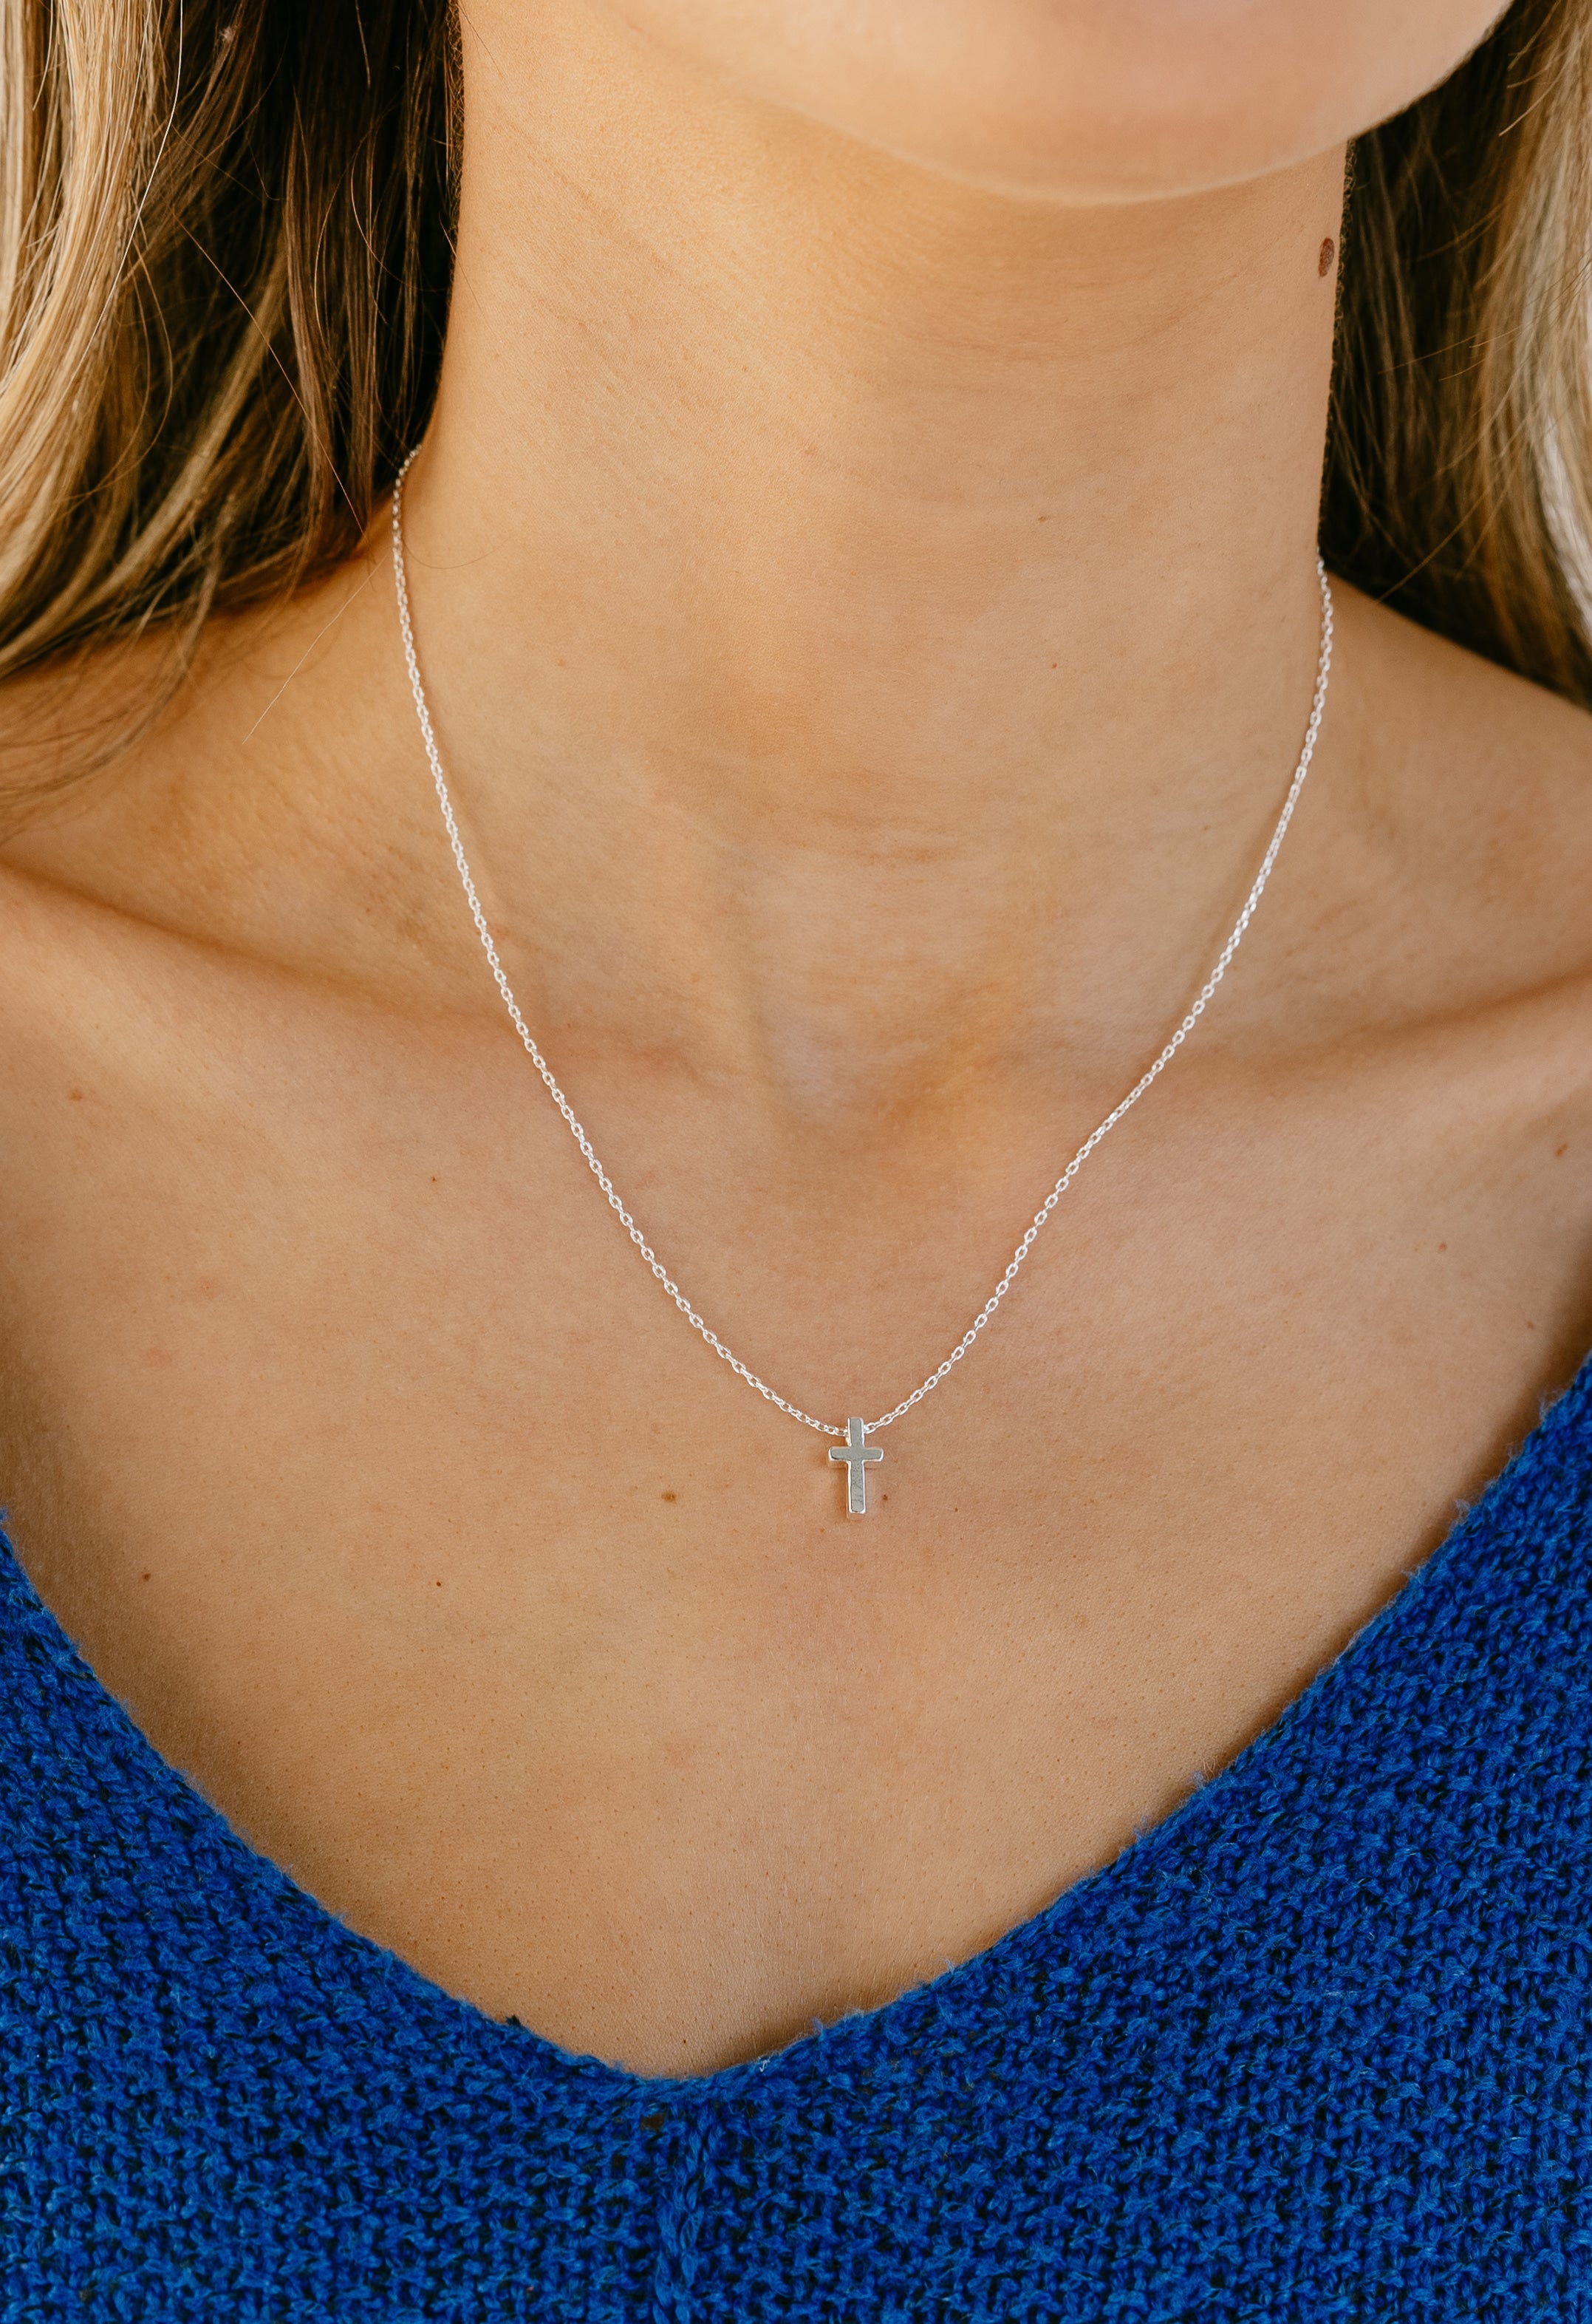 Minimalist Cross Necklace - SILVER - willows clothing NECKLACE